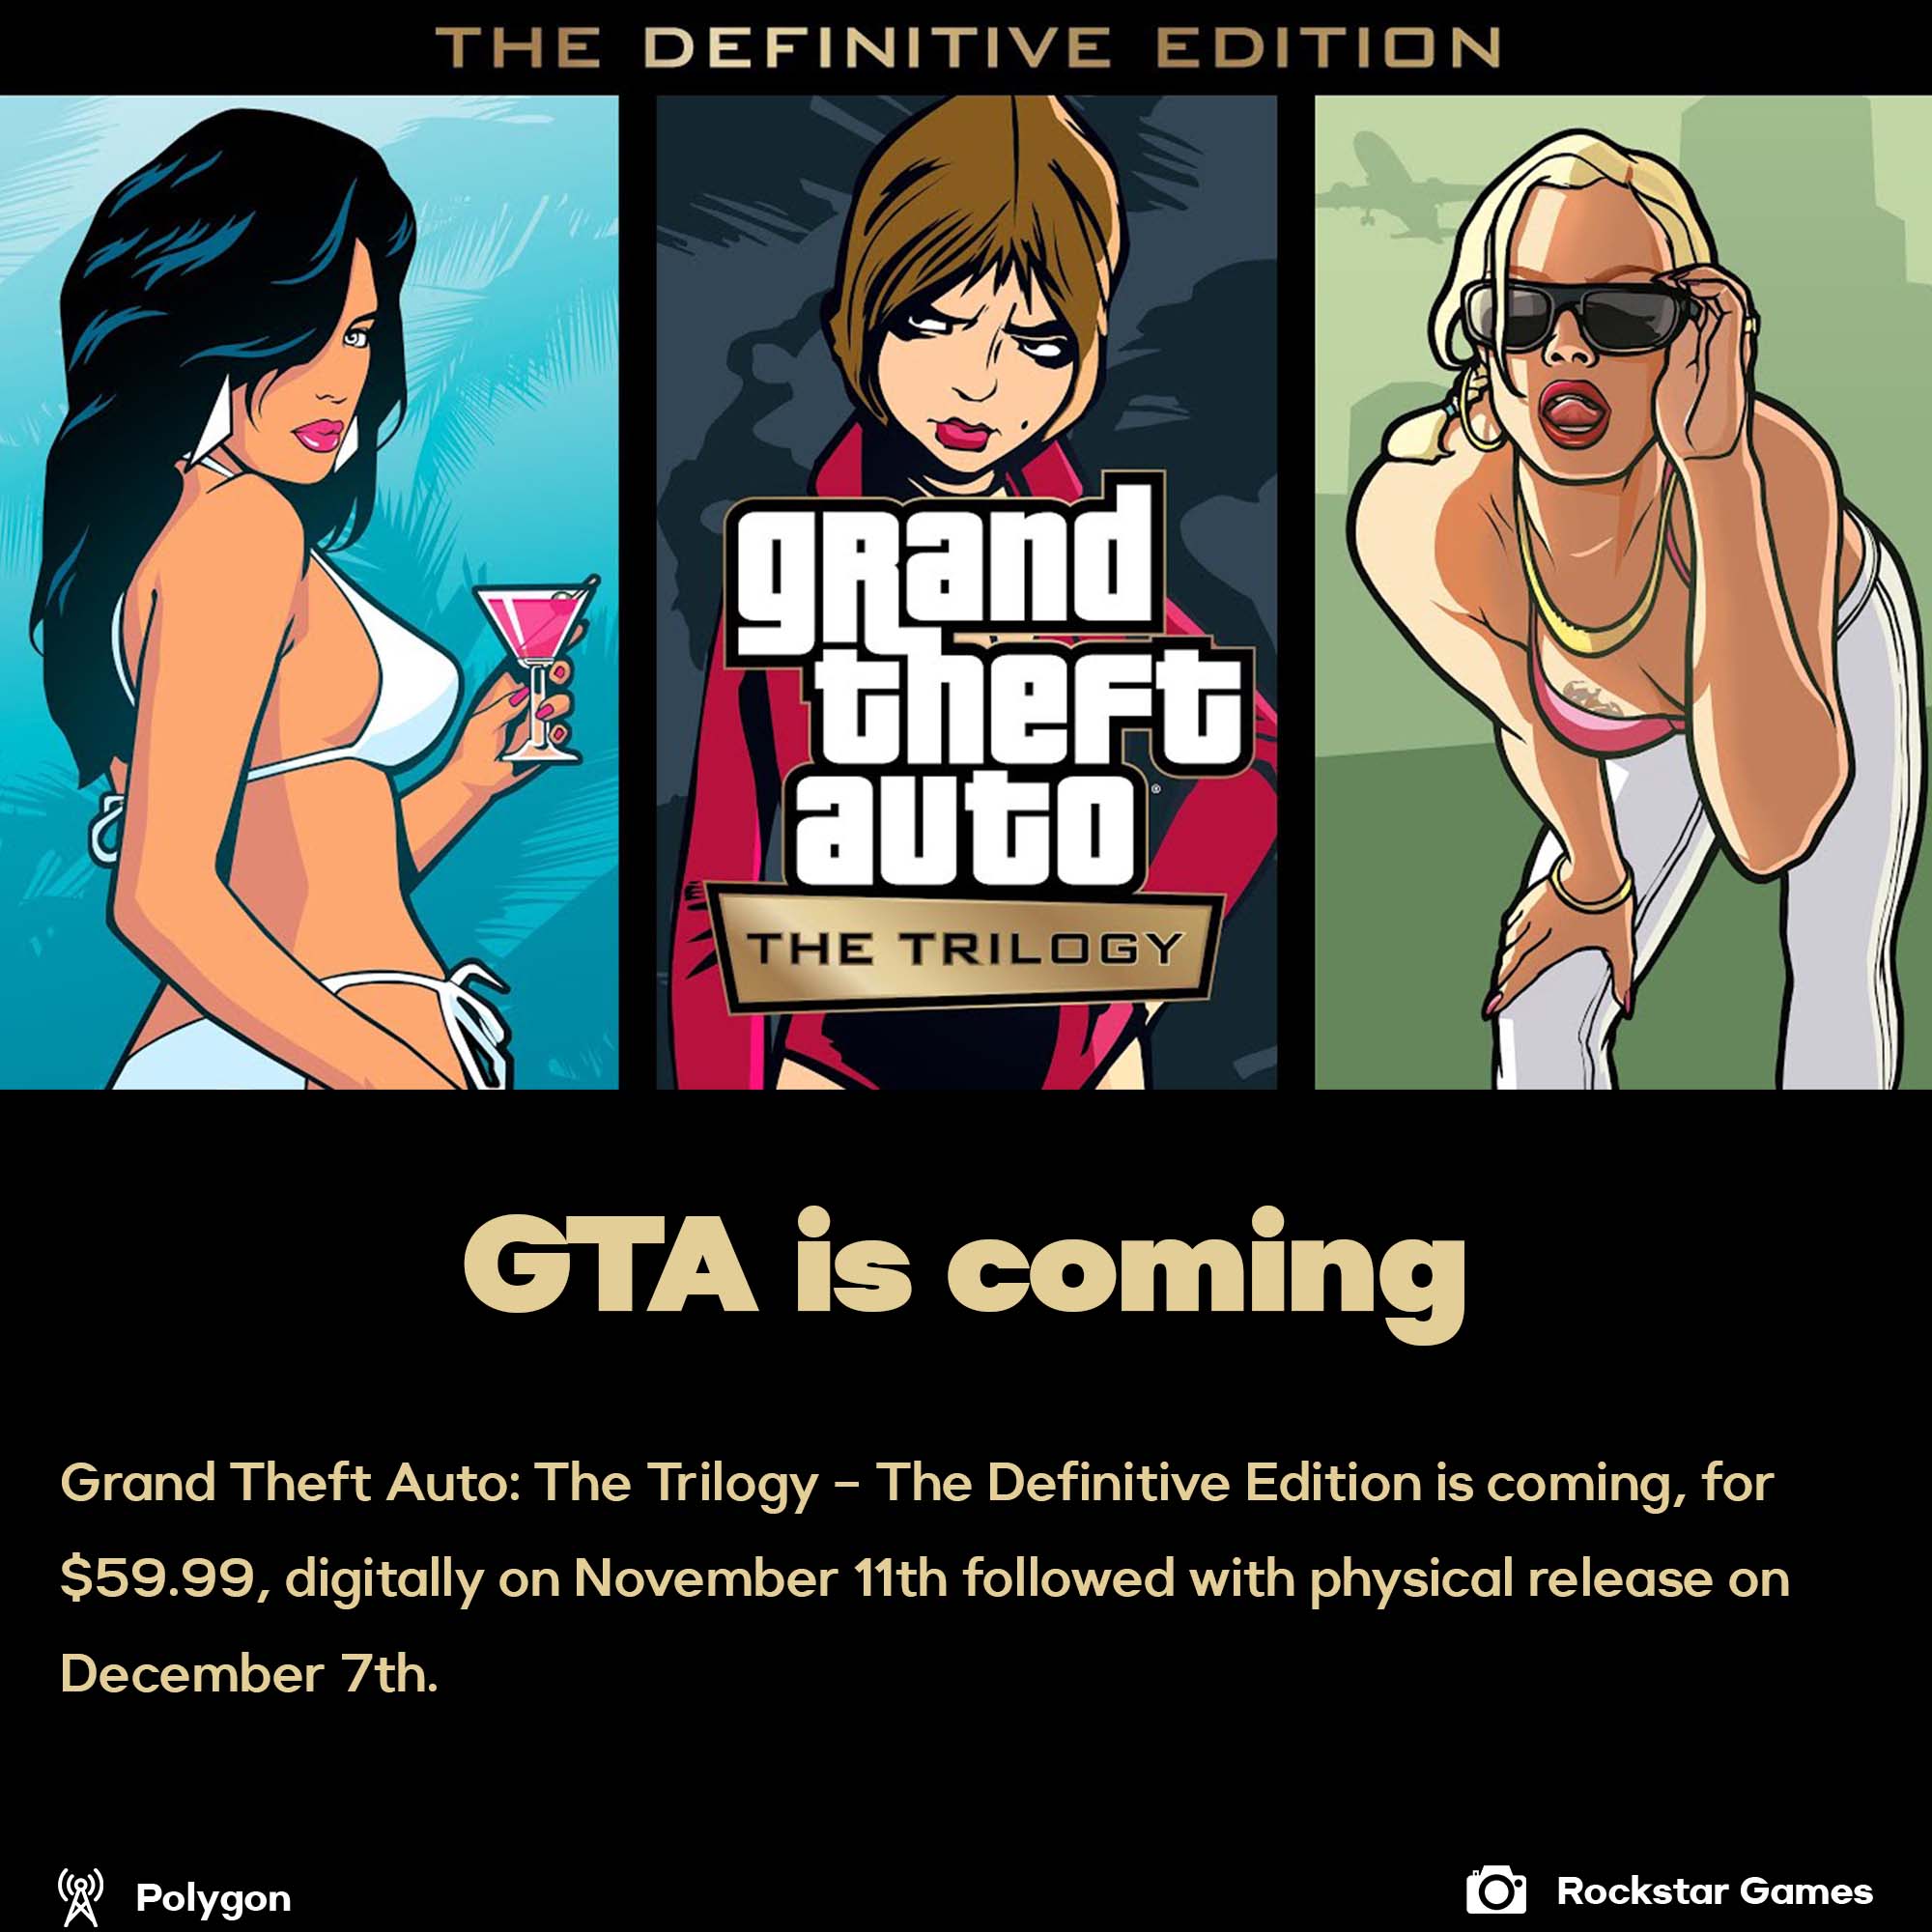 GTA Trilogy is comming next month